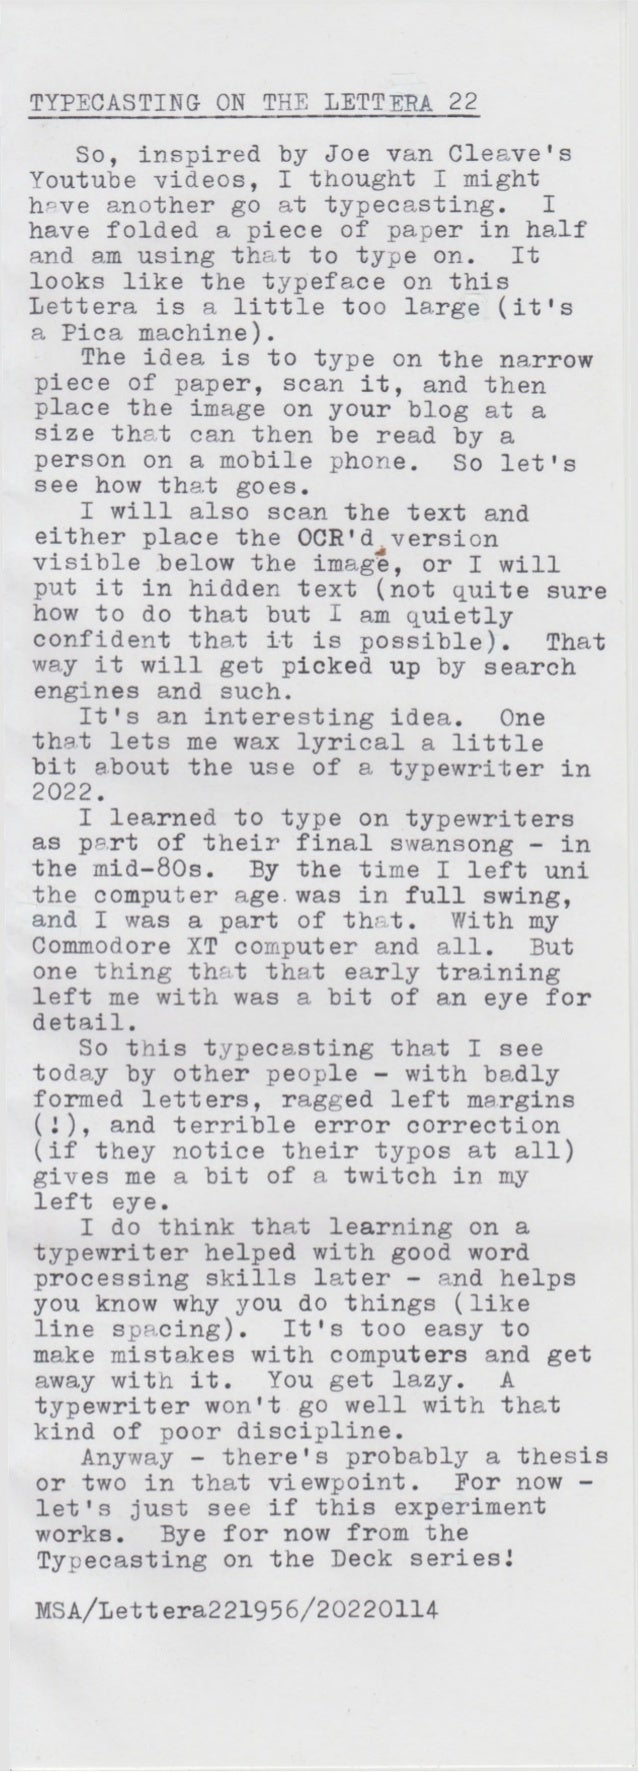 TYPECASTING ON THE LETTERA 22
MSA/Lettera221956/2O22O114
So, inspired by Joe van Cleave's
Youtube videos, I thought I might
have another go at typecasting. I
have folded a piece of paper in half
and am using that to type on. It
looks like the typeface on this
Lettera is a little too large (it's
a Pica machine).
The idea is to type on the narrow
piece of paper, scan it, and then
place the image on your blog at a
size that can then be read by a
person on a mobile phone. So let's
see how that goes.
I will also scan the text and
either place the OCR'diversion
visible below the image, or I will
put it in hidden text (not quite sure
how to do that but I am quietly
confident tha.t it is possible). That
way it will get picked up by search
engines and such.
It's an interesting idea. One
that lets me wax lyrical a little
bit about the use of a typewriter in
2022.
I learned to type on typewriters
as part of their final swansong - in
the mid-80s. By the time I left uni
the computer age. was in full swing,
and I was a part of that. With my
Commodore XT computer and all. But
one thing that that early training
left me with was a bit of an eye for
detail.
So this typecasting that I see
today by other people - with baldly
formed letters, ragged left margins
(1), and terrible error correction
(if they notice their typos at all)
gives me a bit of a twitch in my
left eye.
I do think that learning on a
typewriter helped with good word
processing skills later - and helps
you know why you do things (like
line spacing). It's too easy to
make mistakes with computers and get
away with it. You get lazy. A
typewriter won't go well with that
kind of poor discipline.
Anyway - there's probably a thesis
or two in that viewpoint. For now -
let's just see if this experiment
works. Bye for now from the
Typecasting on the Deck series J
 